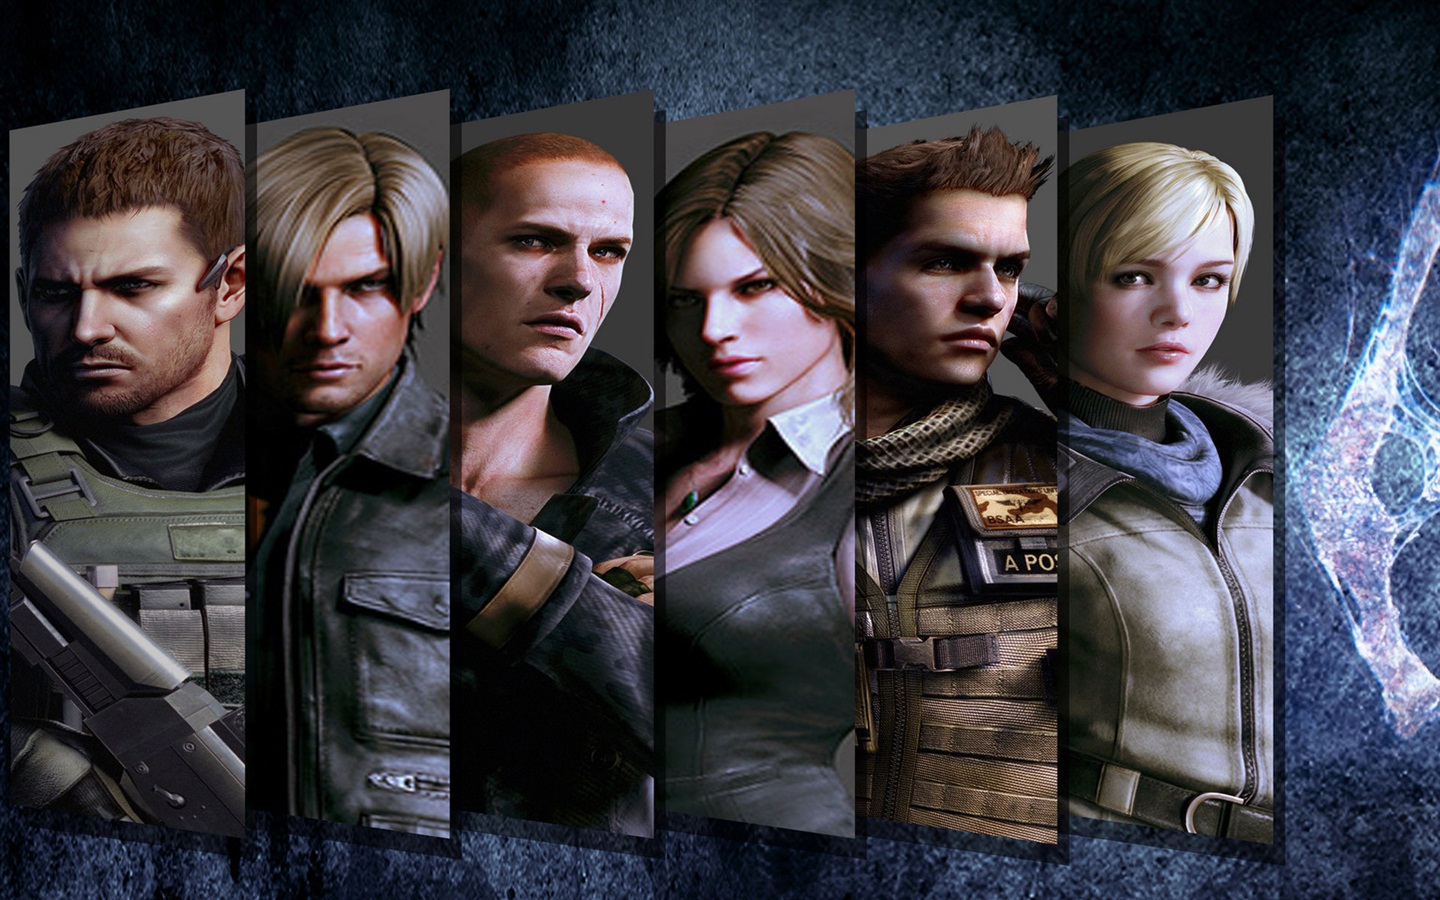 Resident Evil 6 HD game wallpapers #2 - 1440x900